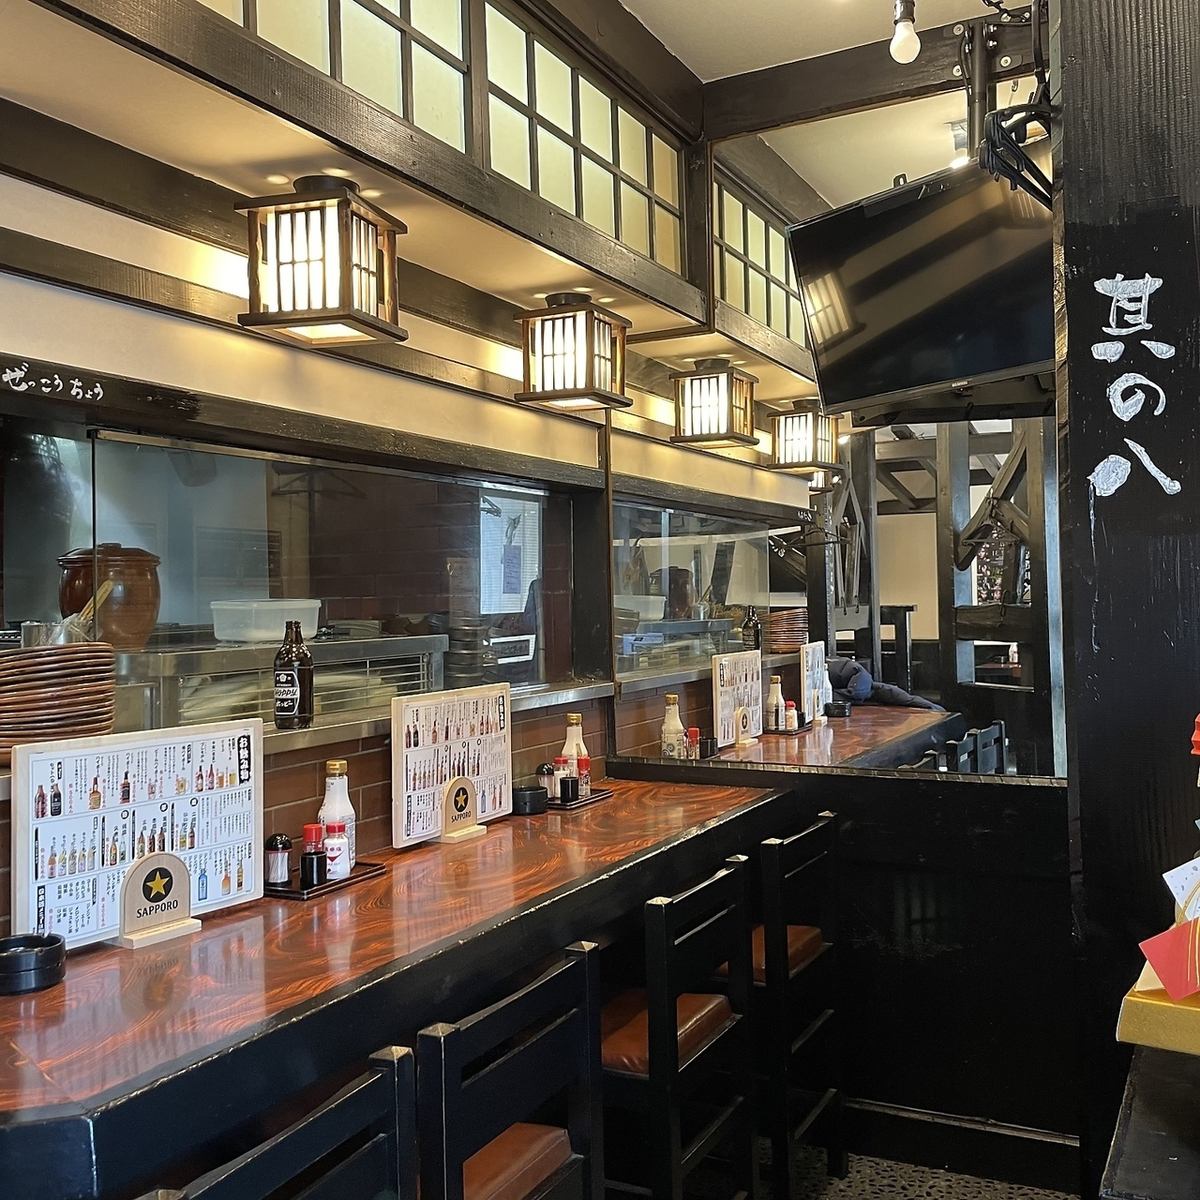 A restaurant where you can enjoy our proud handmade Japanese food at a reasonable price!